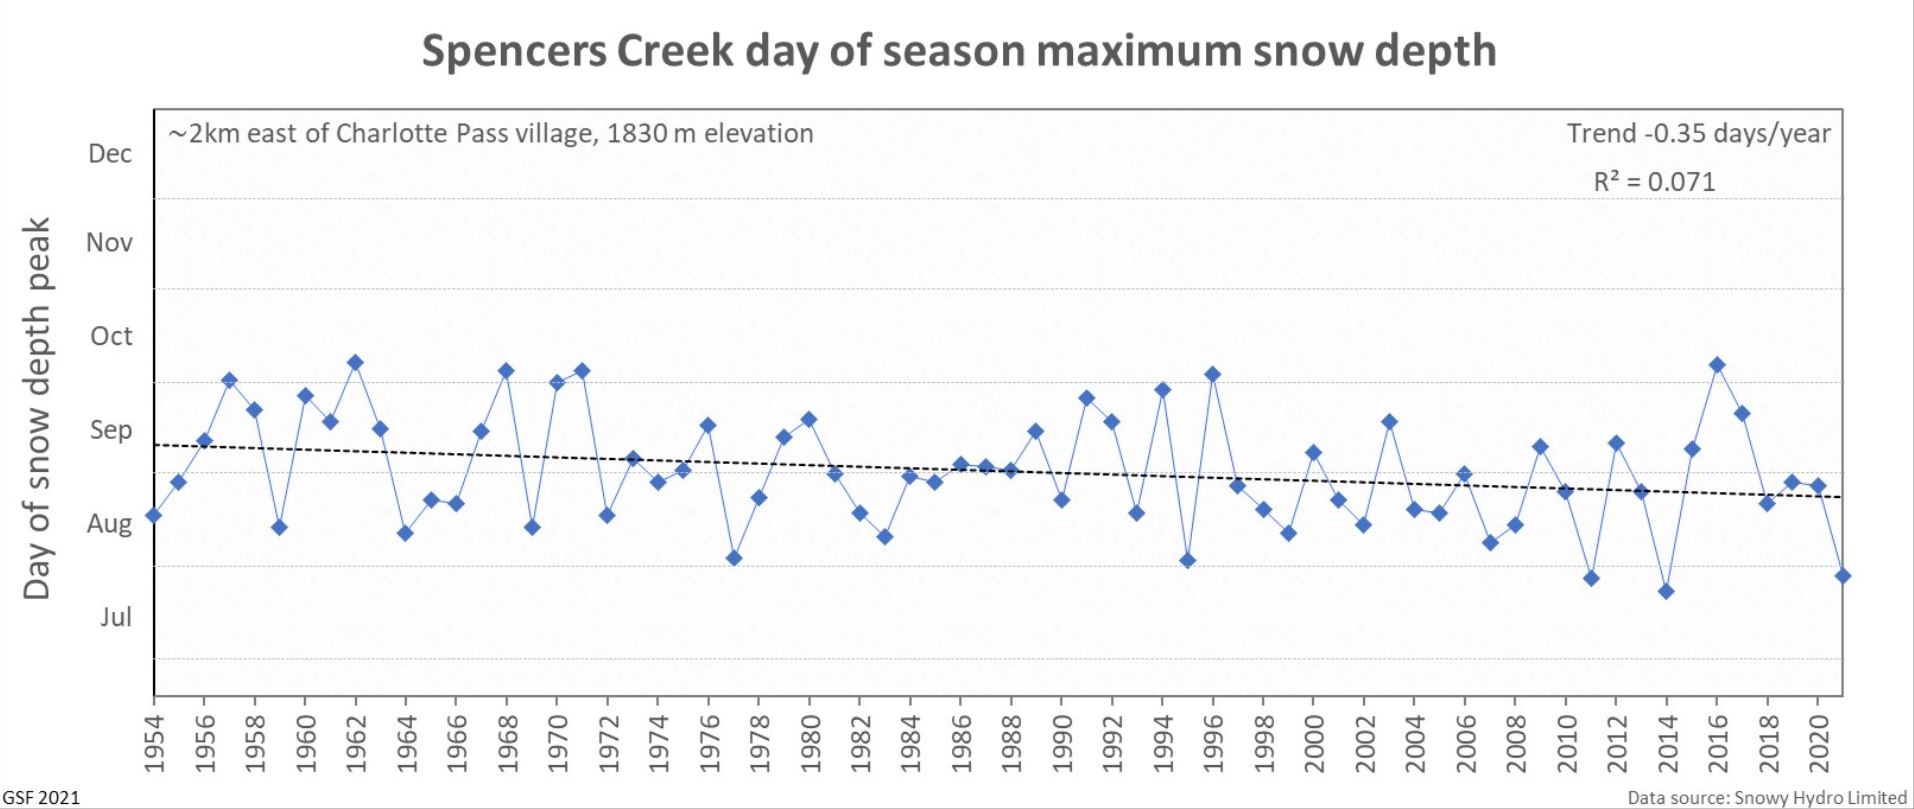 Worrying news about the peak depth in Aussie snow seasons